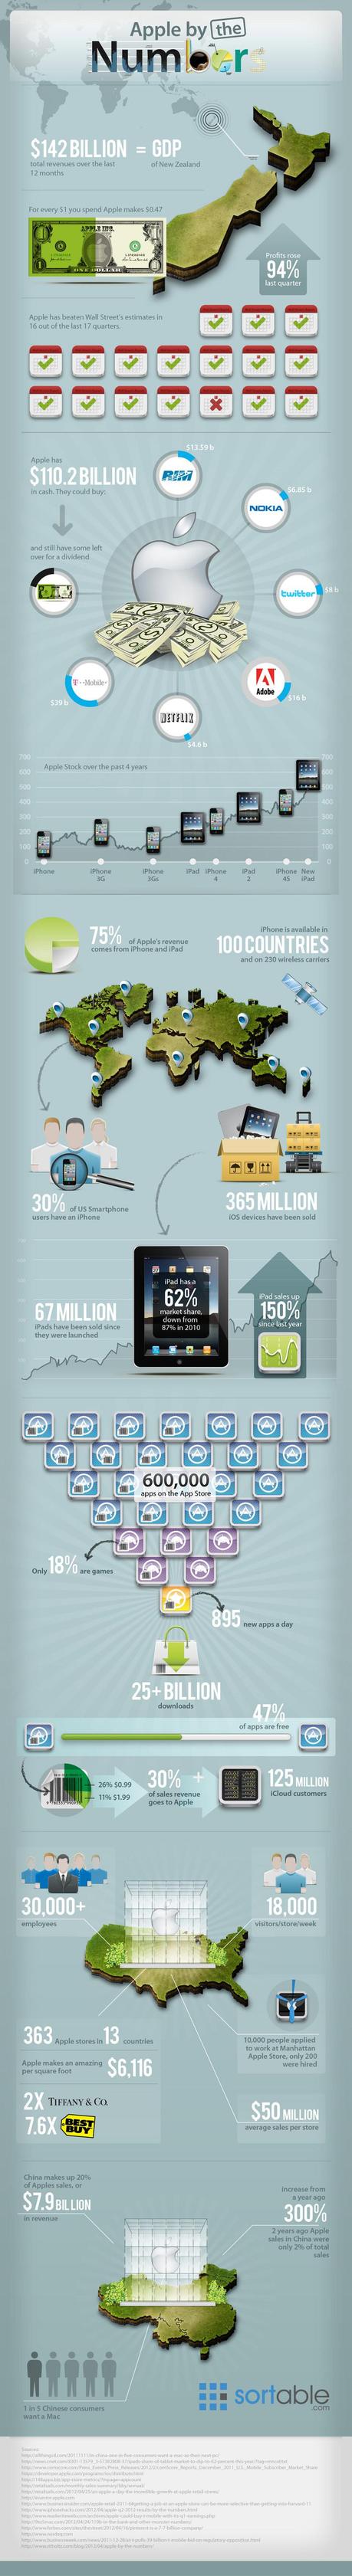 Apple by the Numbers 800 Une infographie sur lempire Apple